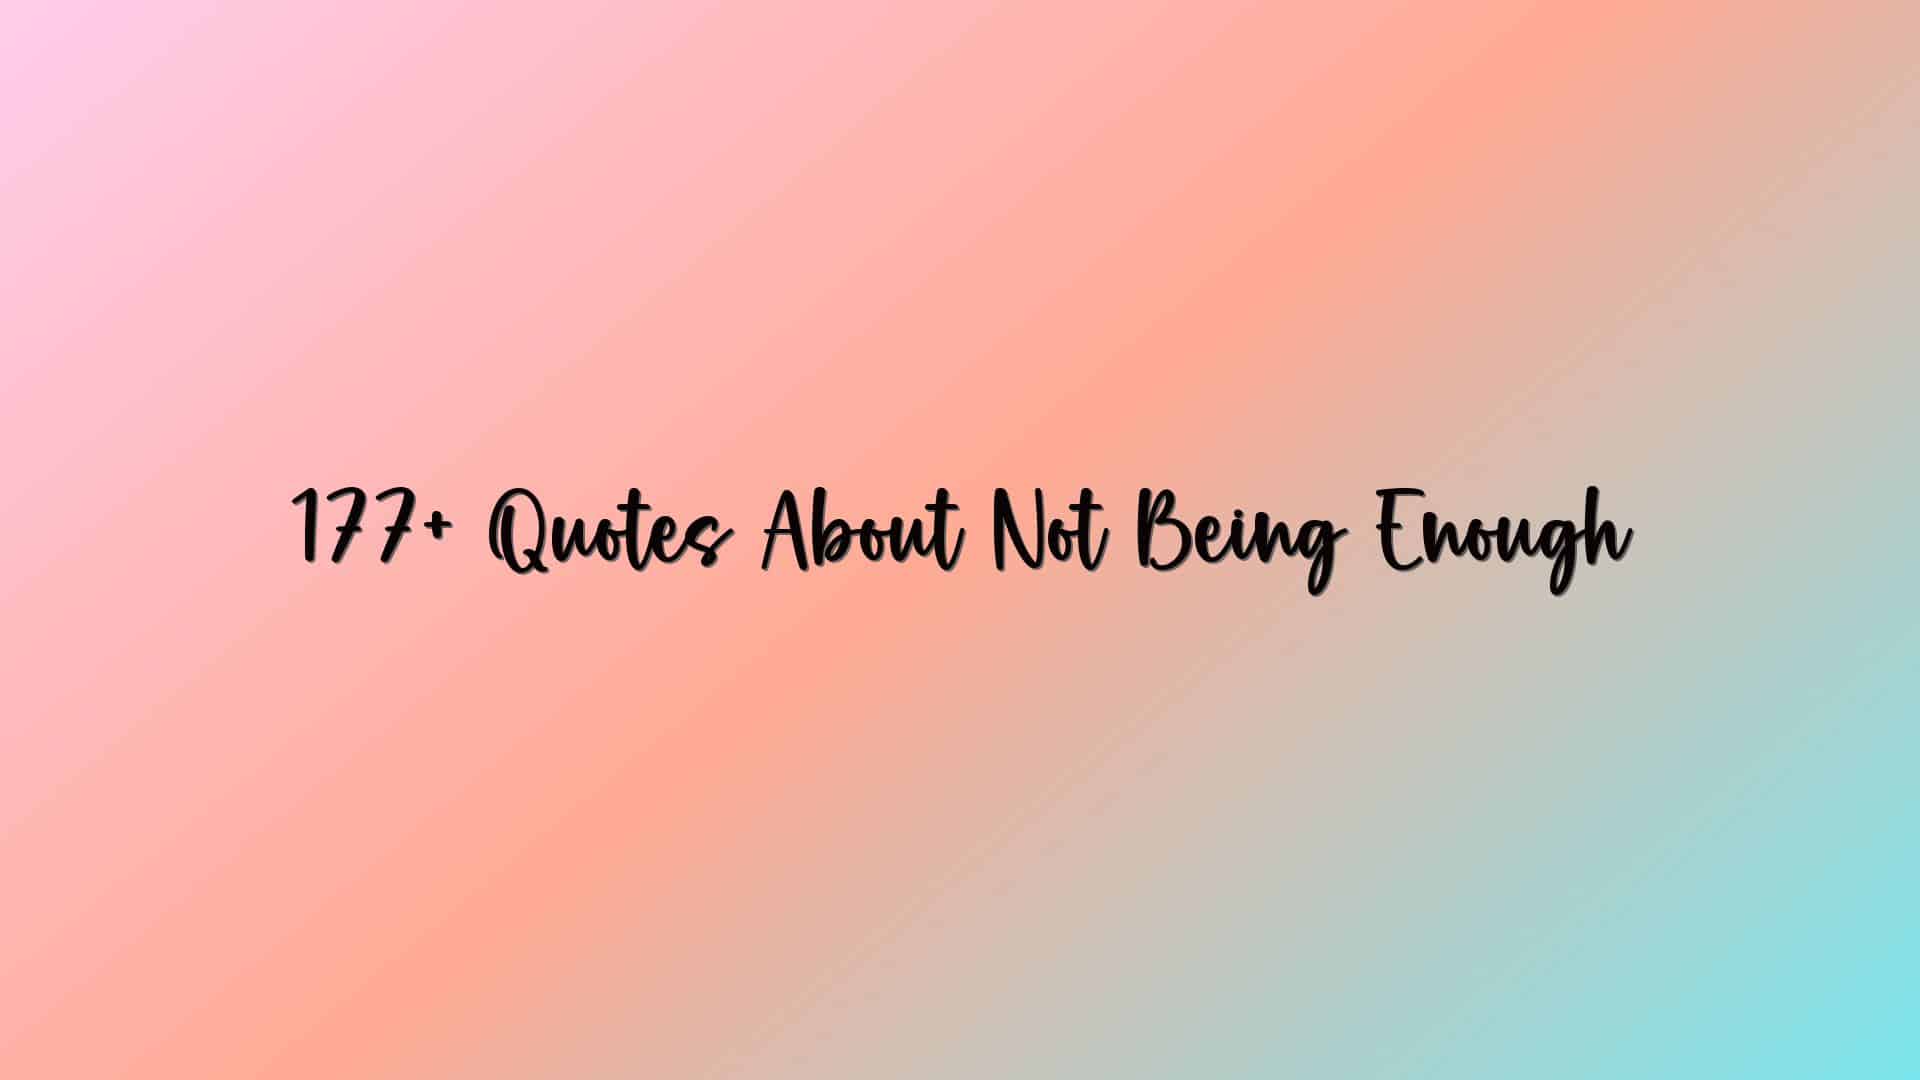 177+ Quotes About Not Being Enough